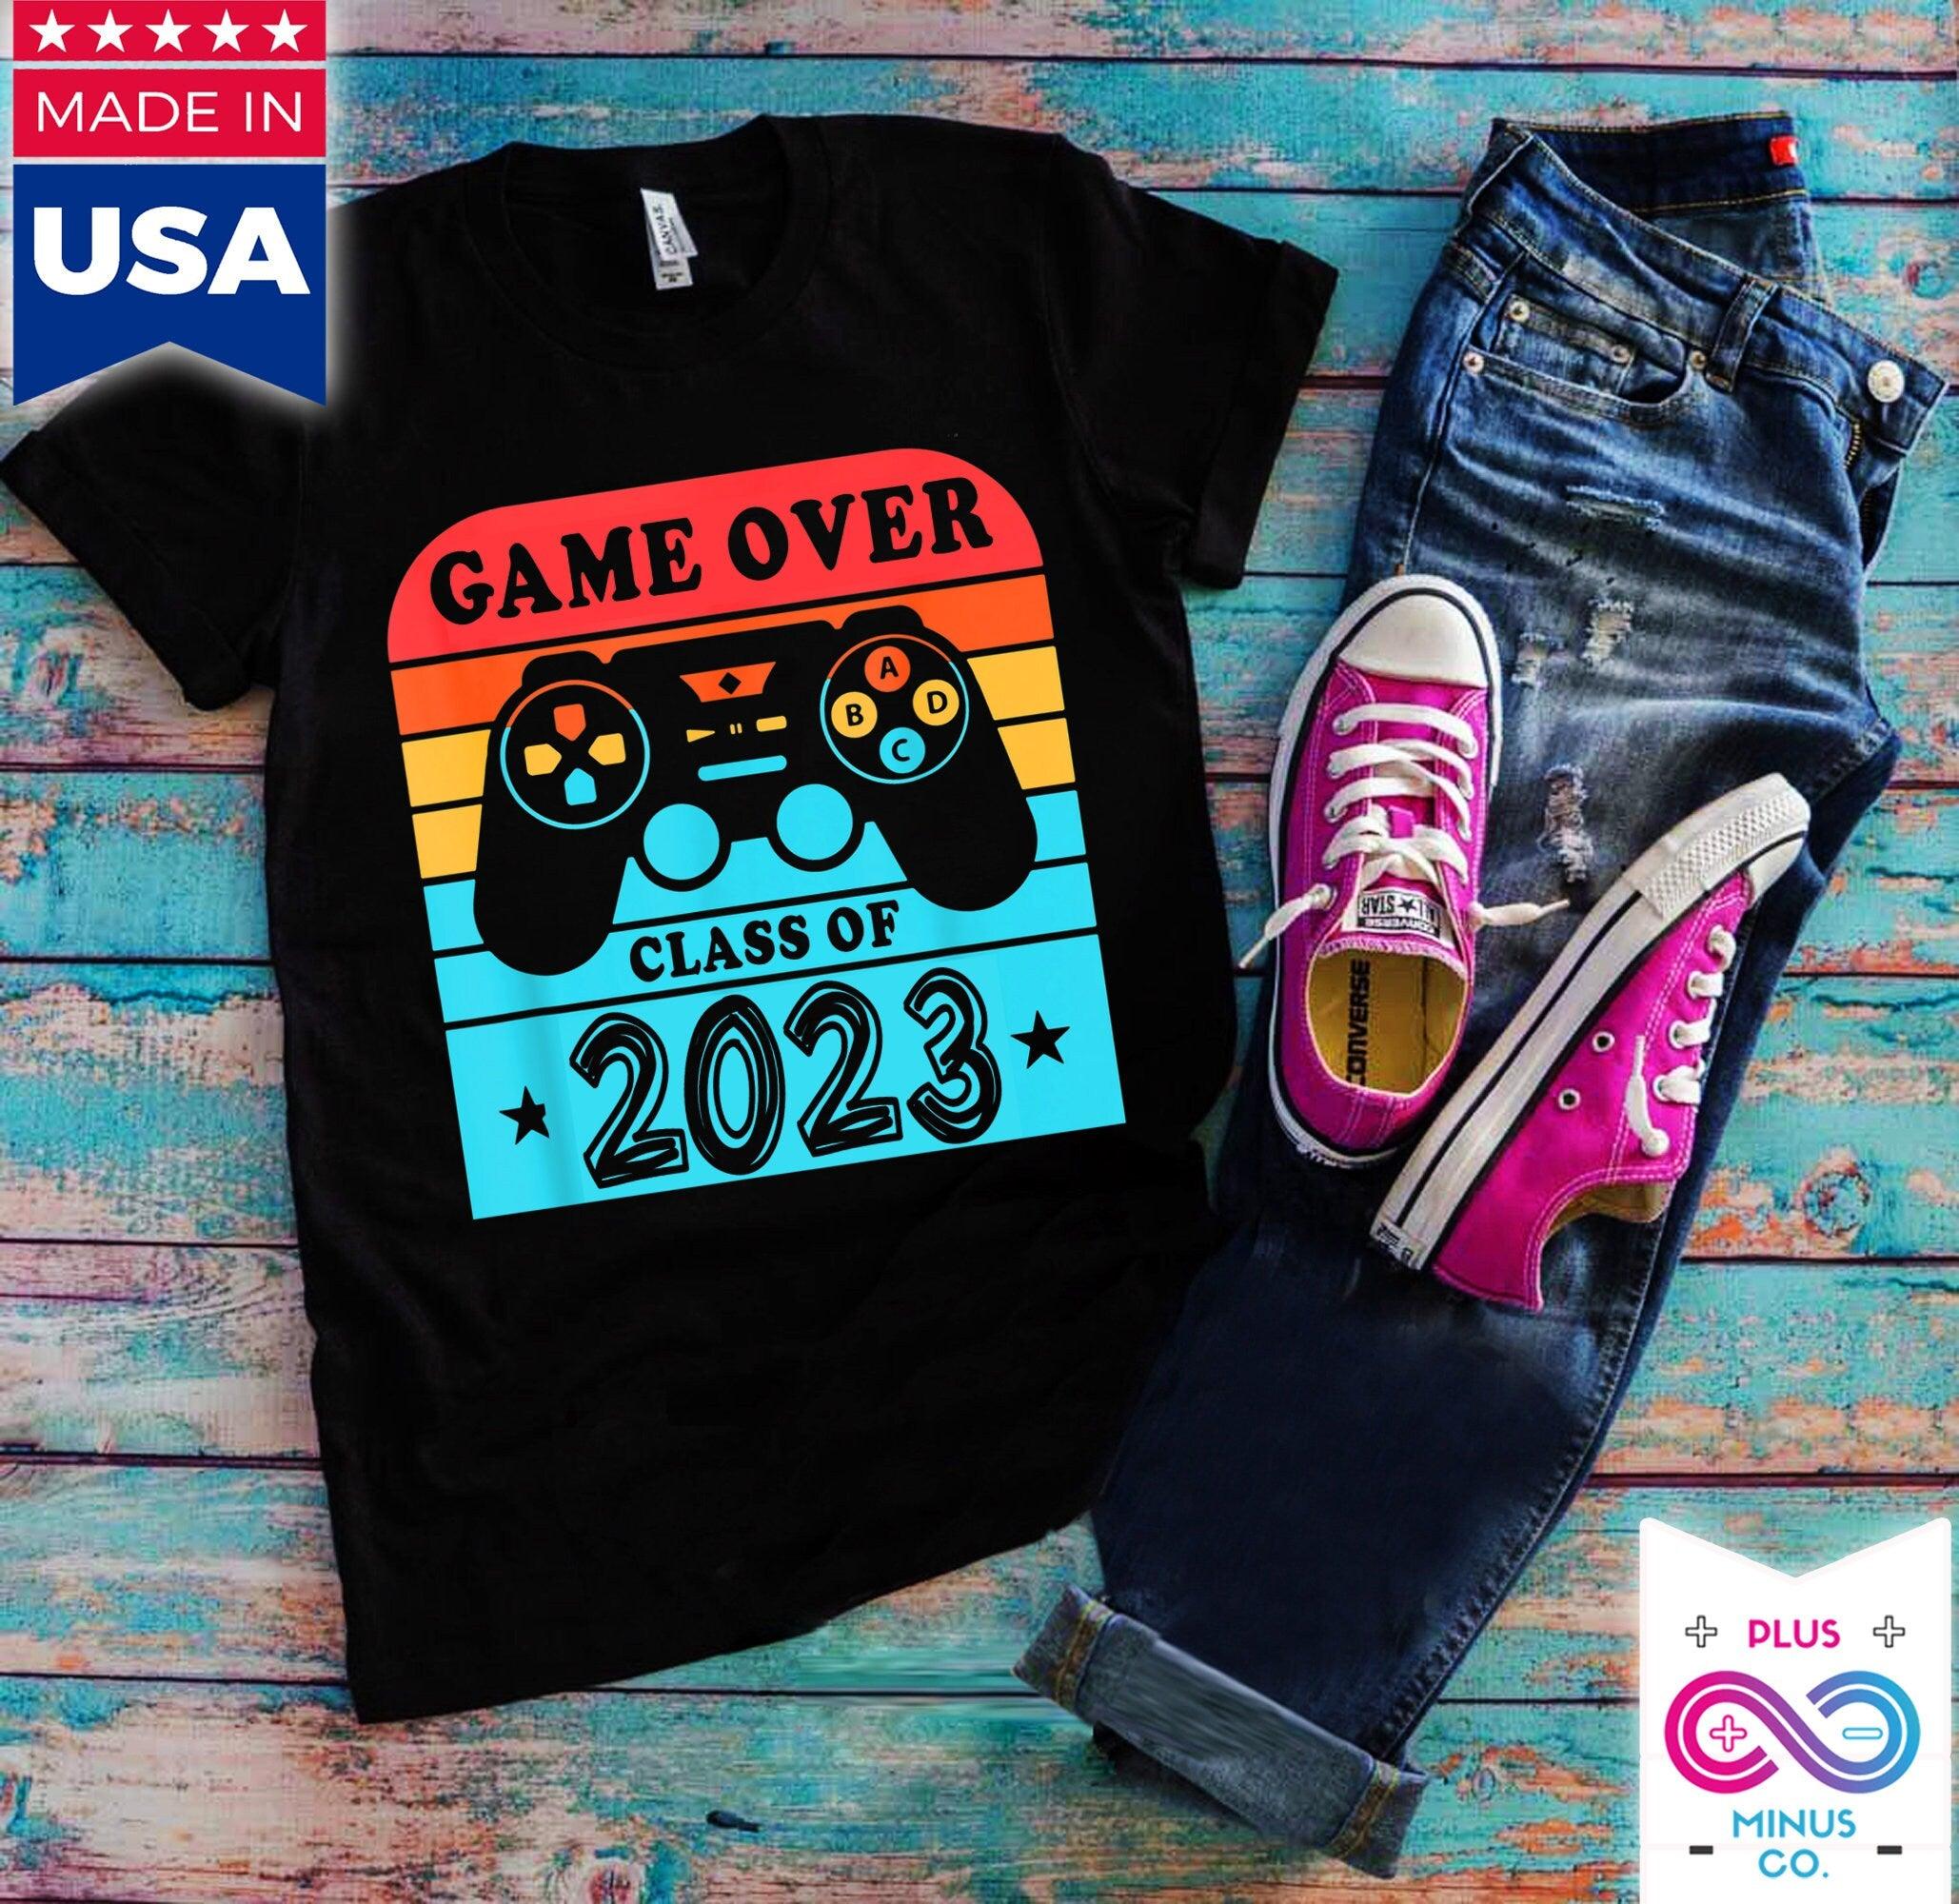 Game over class of 2023 T-Shirts, Collge Graduation Gift, Class Of 2023 tee, Senior Shirt, Gift For The Graduate, Gift For Her,senior gaming - plusminusco.com